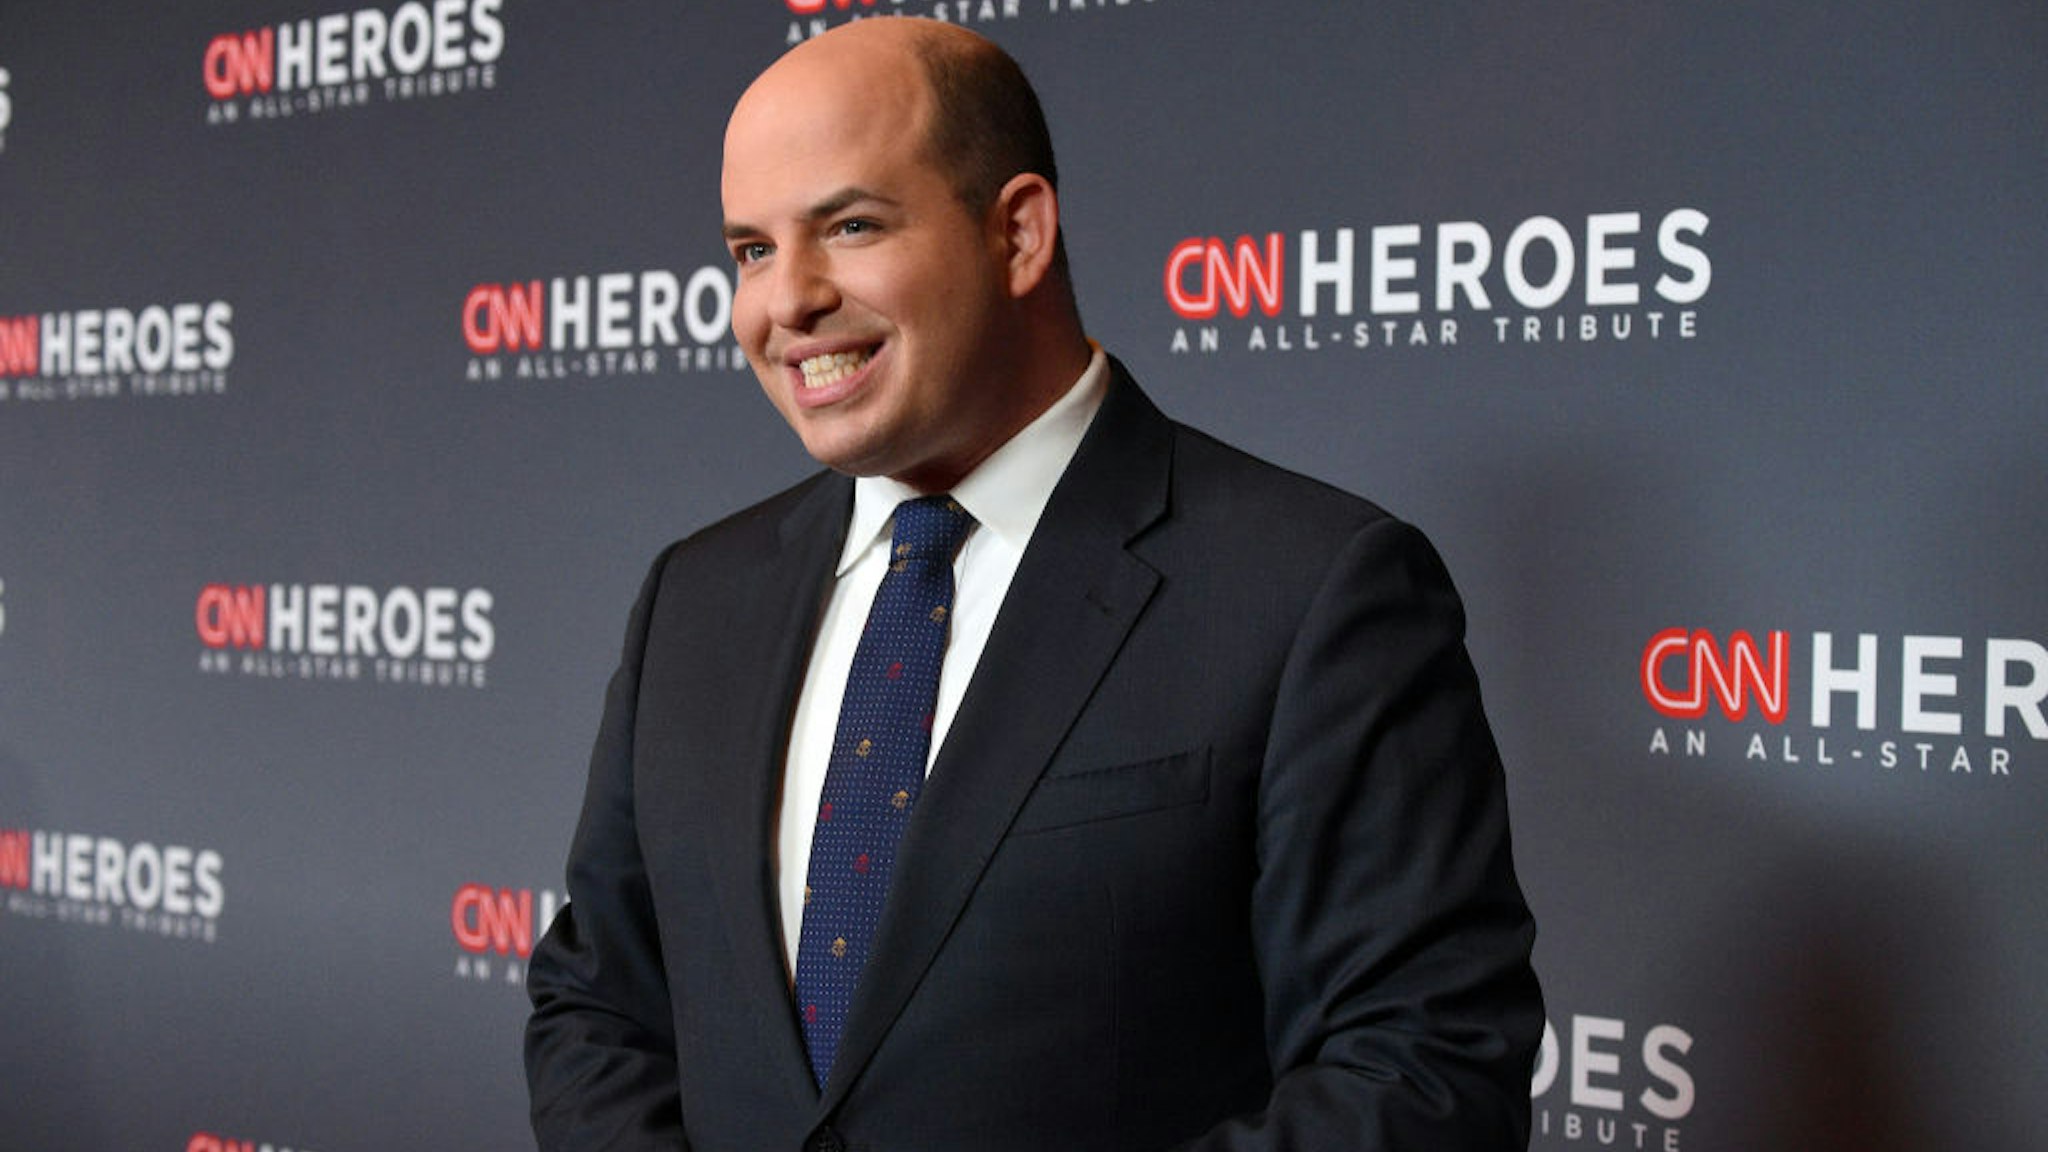 NEW YORK, NEW YORK - DECEMBER 08: Brian Stelter attends CNN Heroes at the American Museum of Natural History on December 08, 2019 in New York City. (Photo by Kevin Mazur/Getty Images for WarnerMedia)